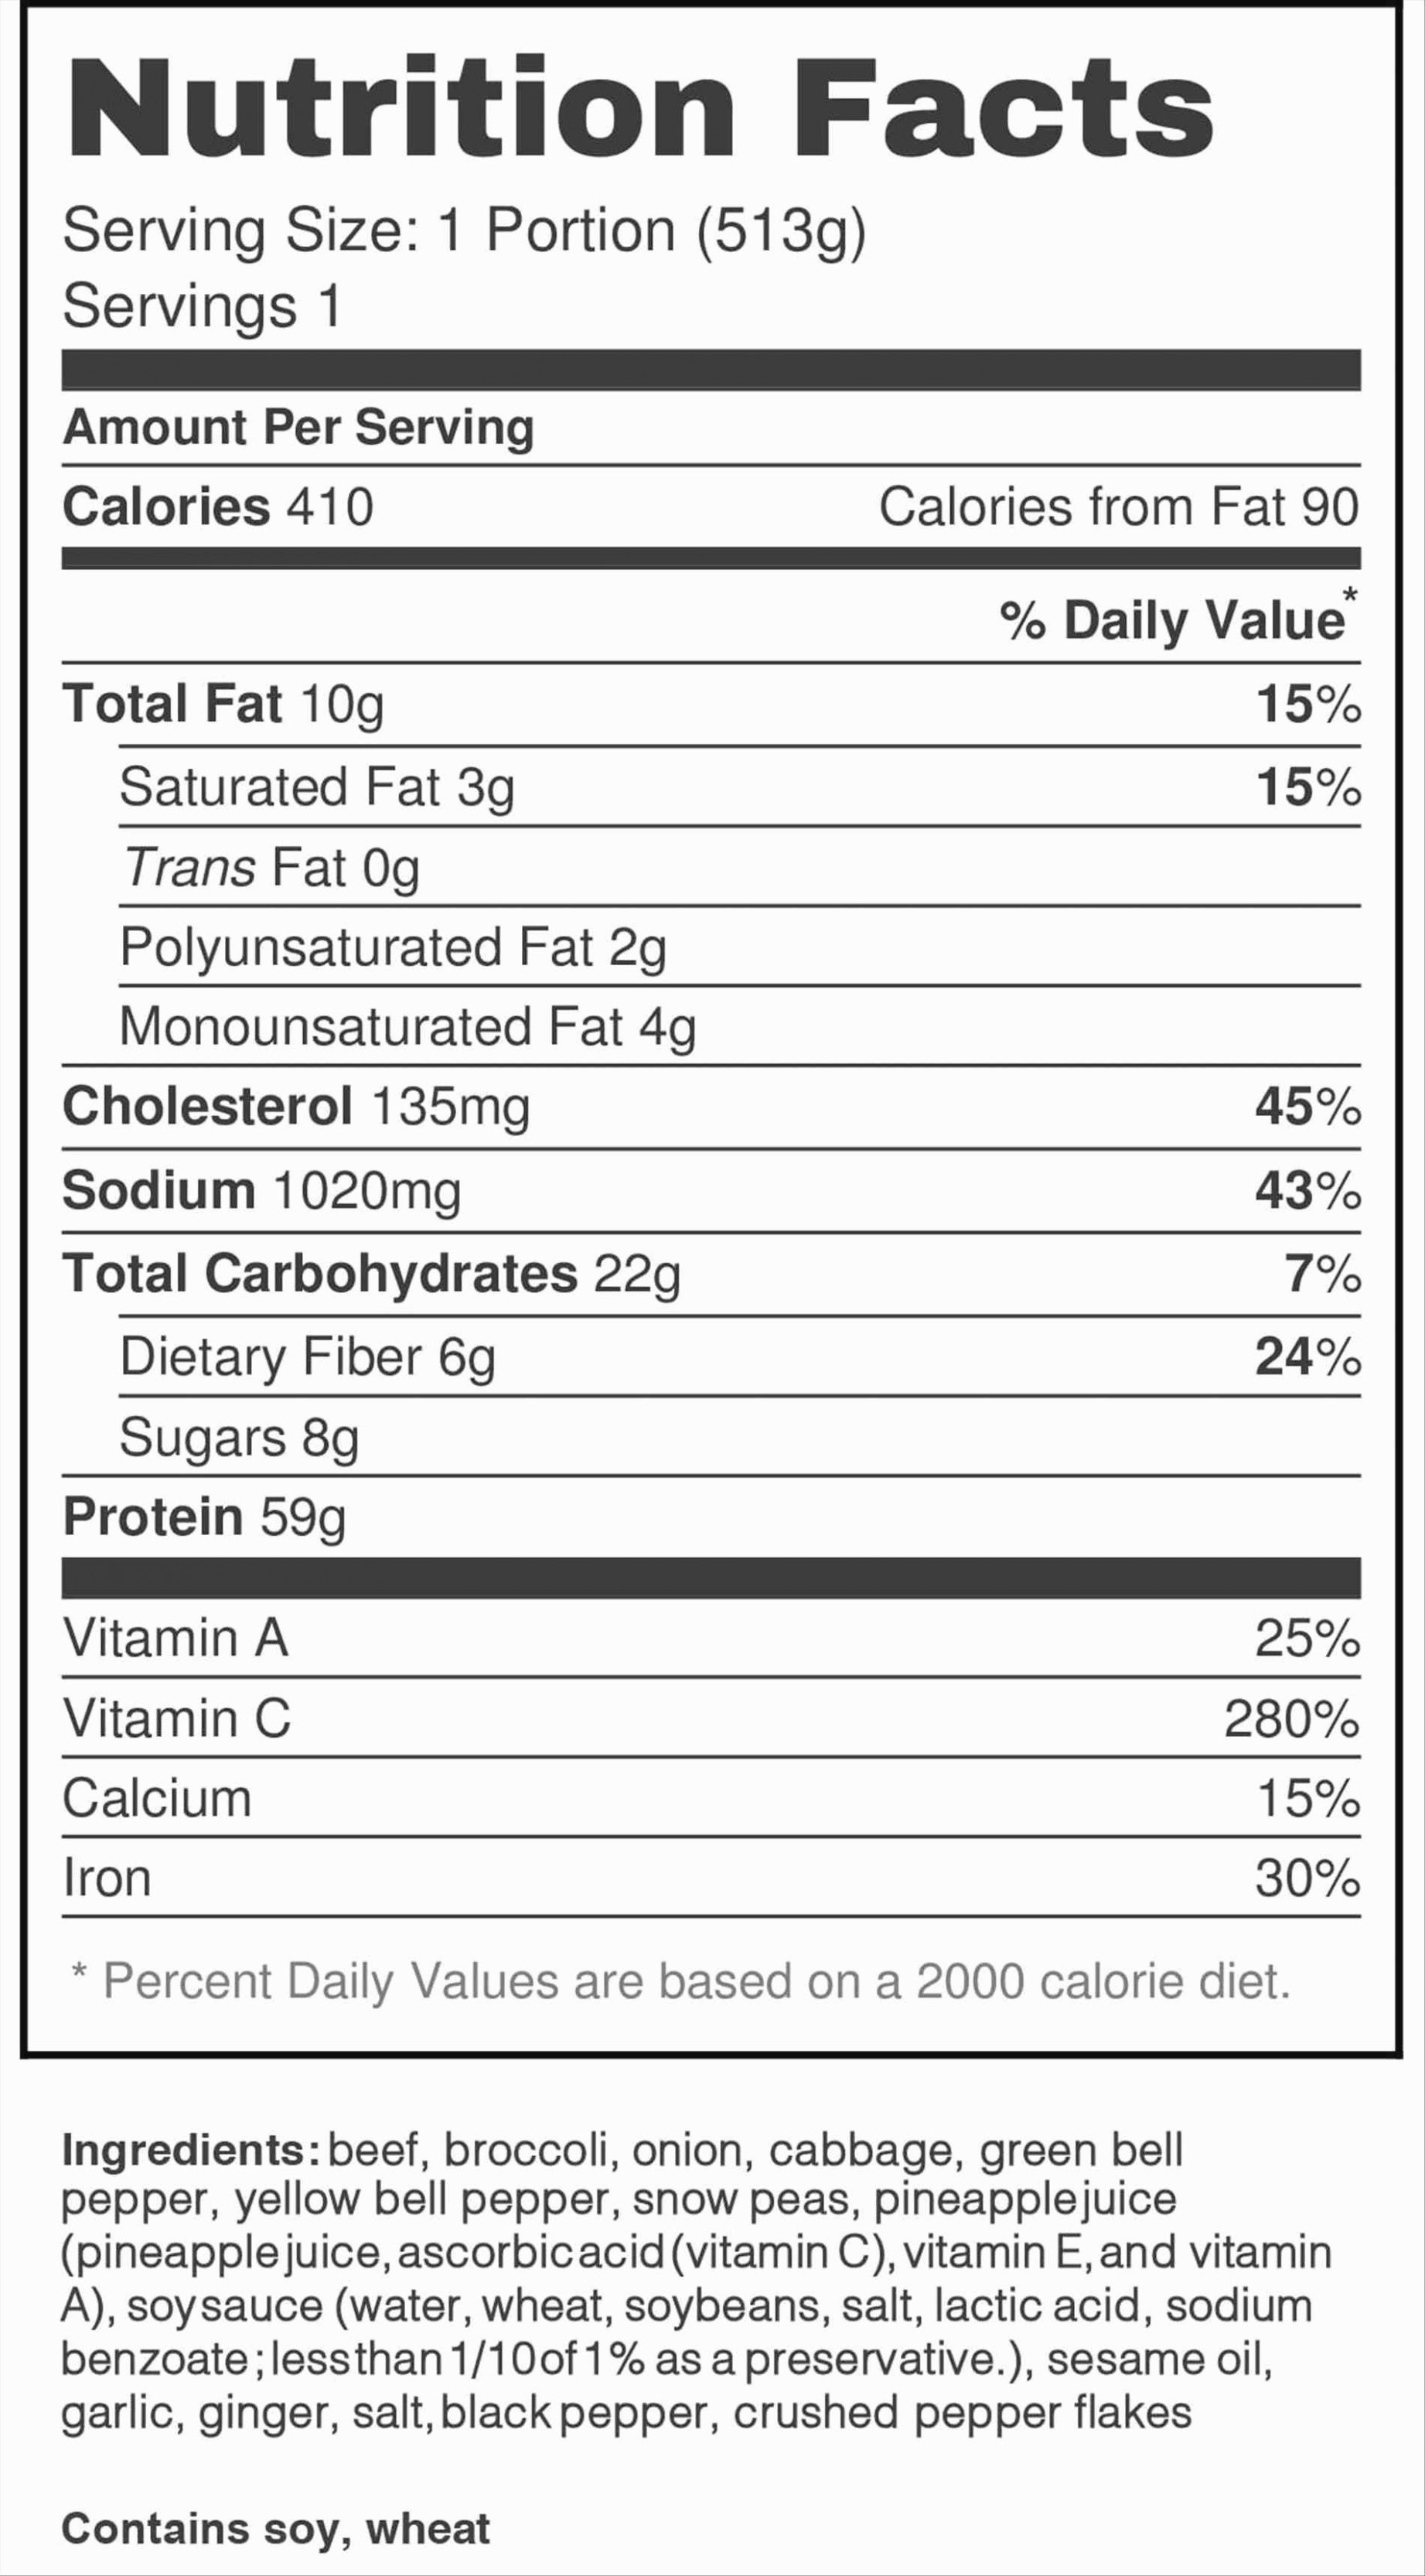 Blank Nutrition Facts Label Template - Juleteagyd Pertaining To Blank Food Label Template